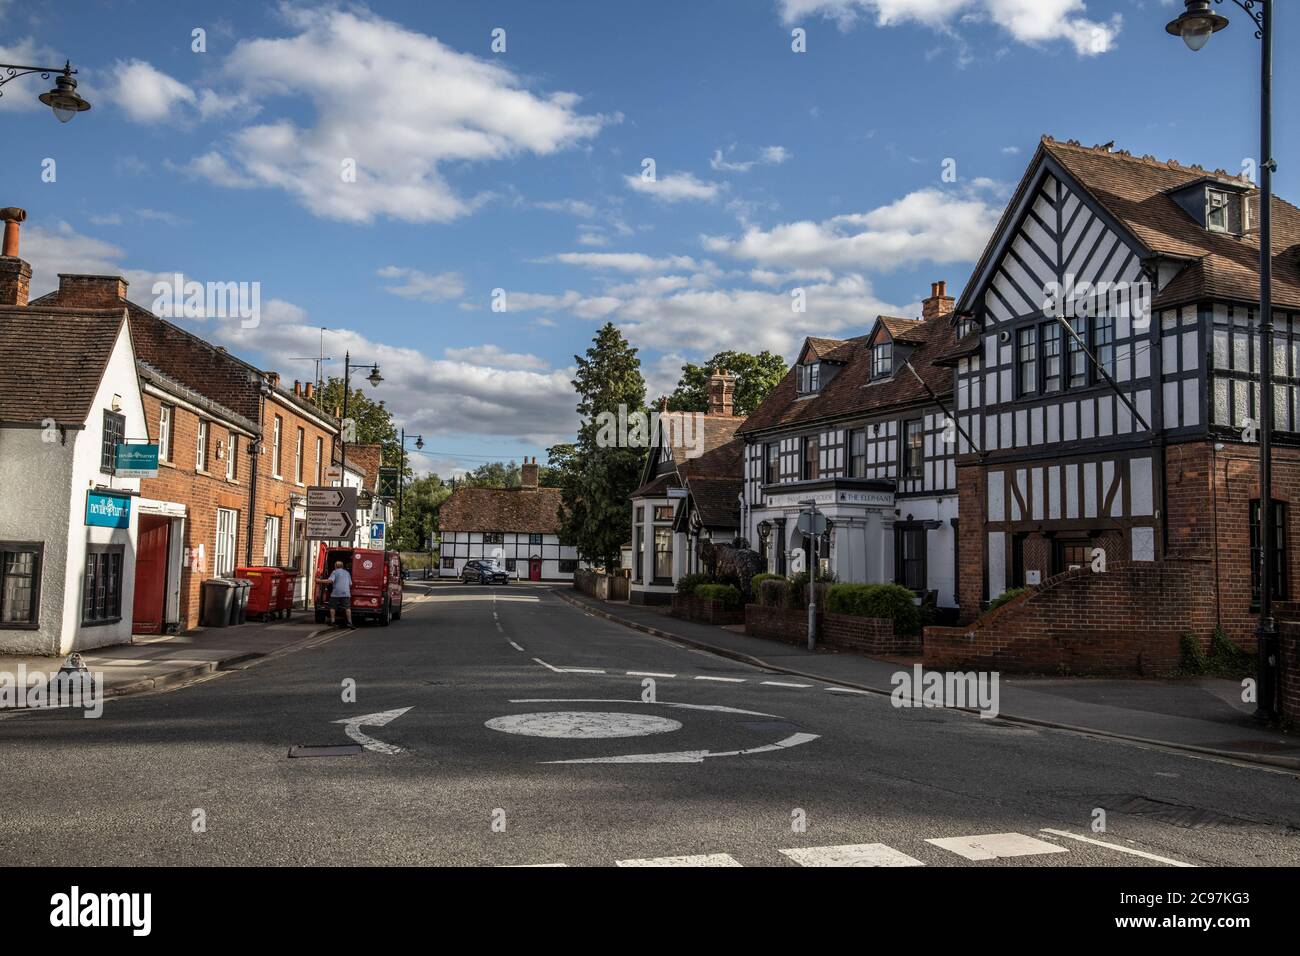 Pangbourne village, situated on the River Thames, in the county of Berkshire, England, United Kingdom Stock Photo